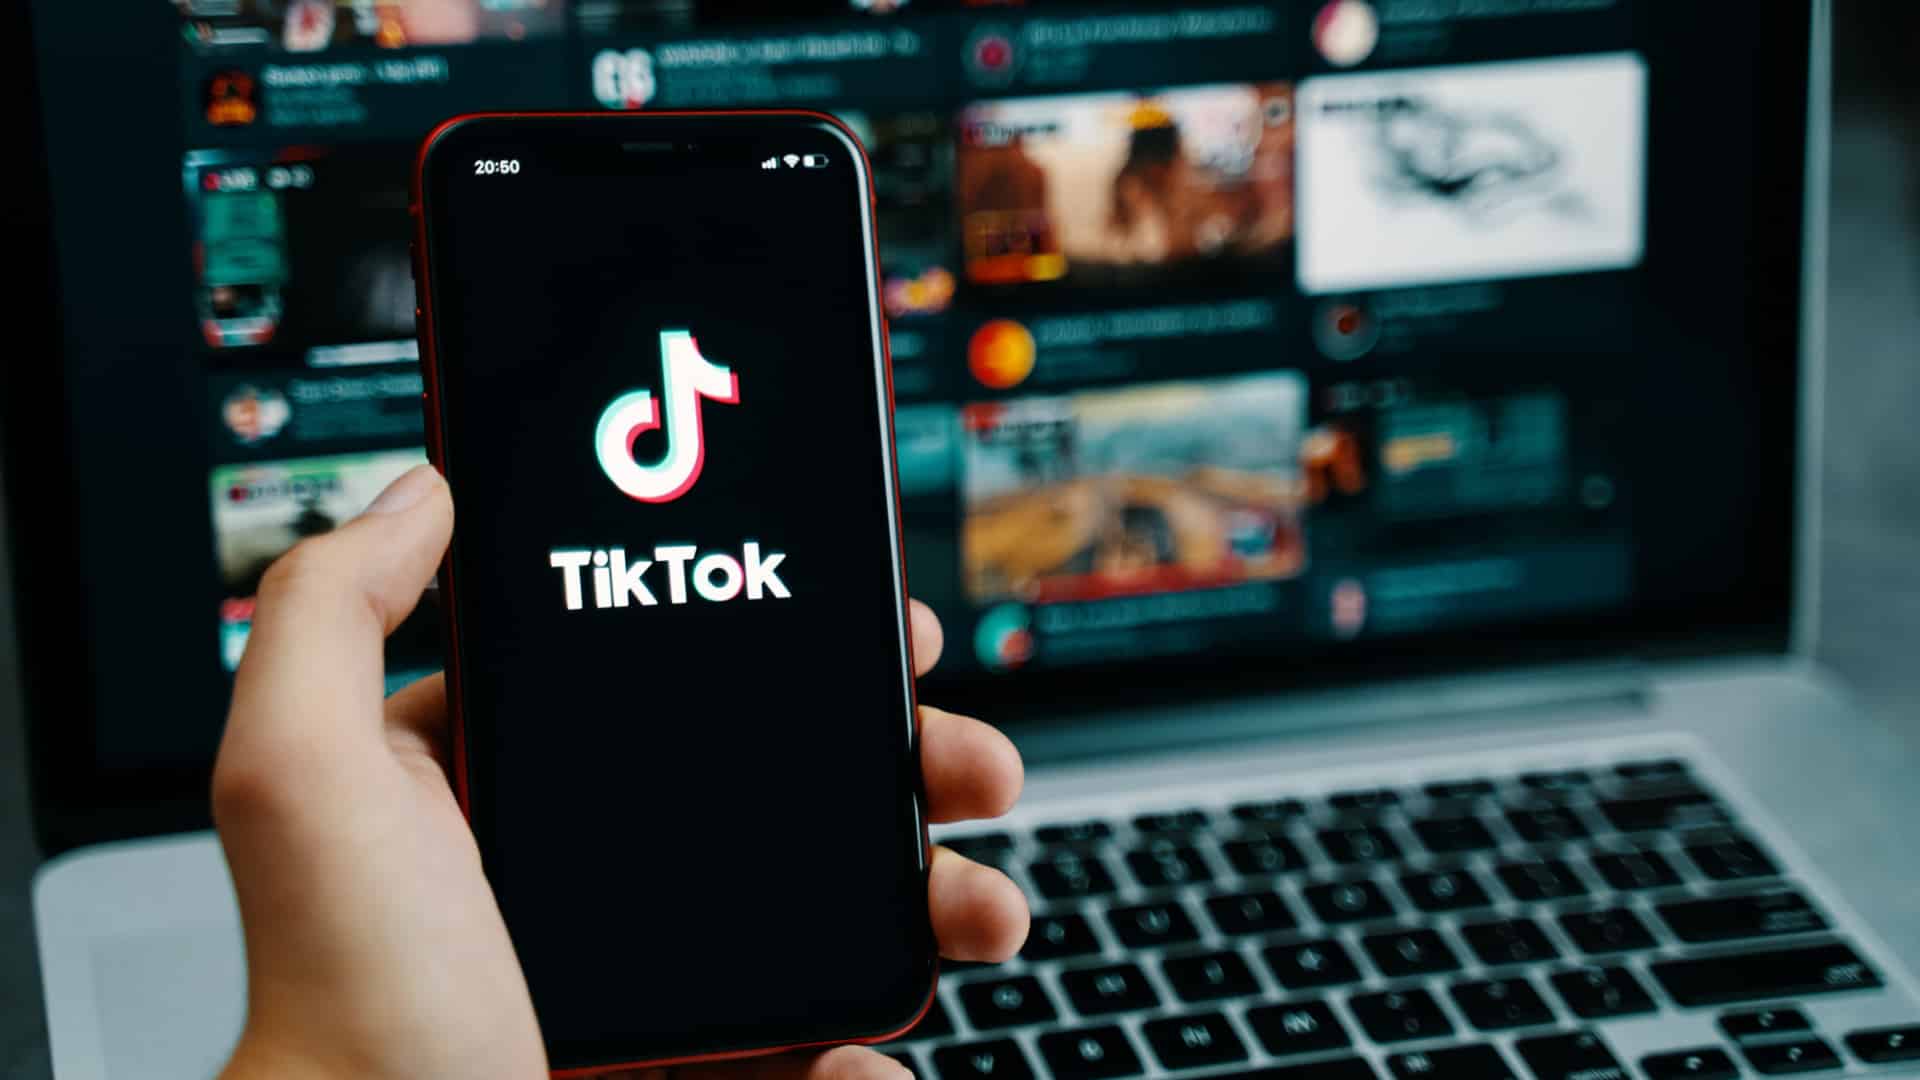 TikTok quietly adds Wikipedia snippets to its search results